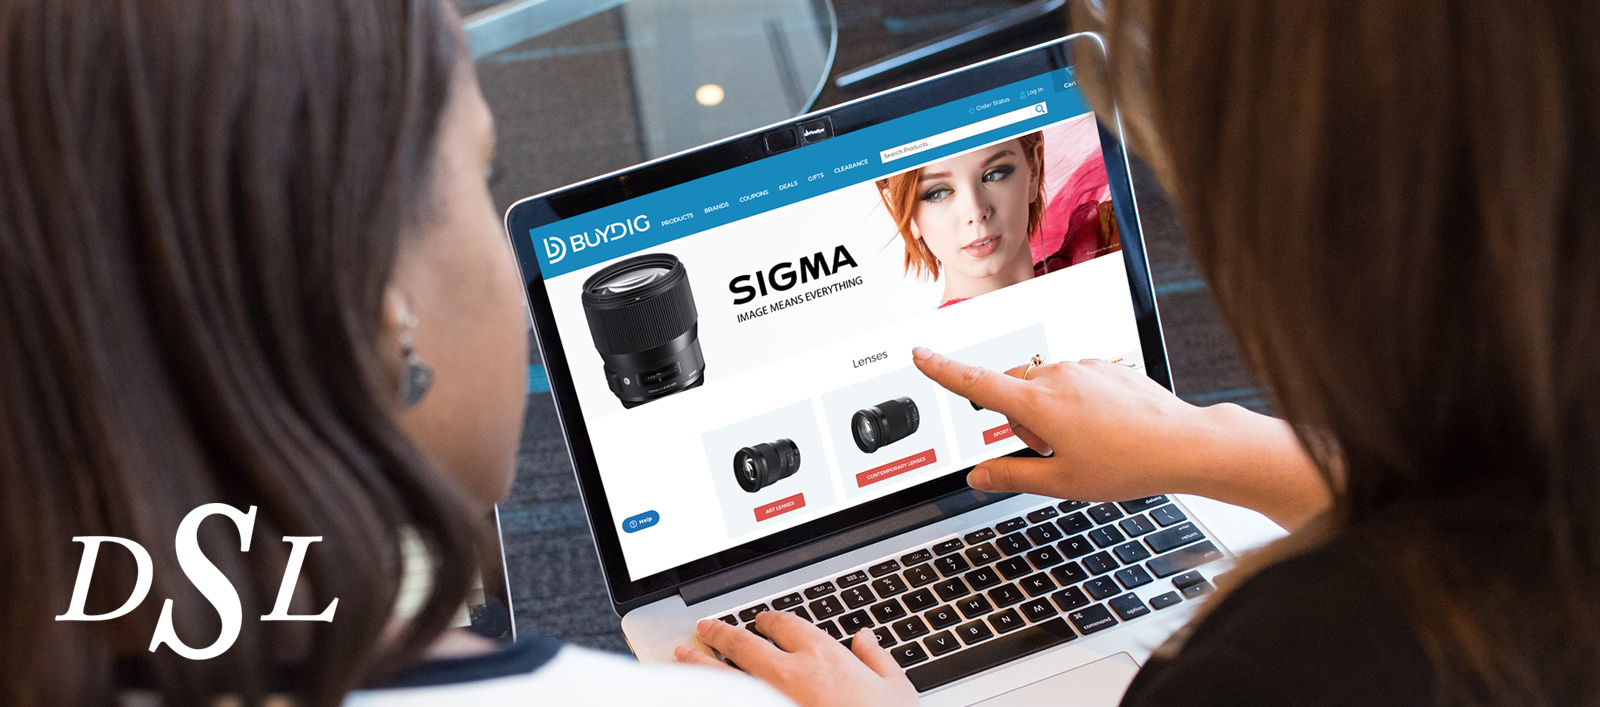 Two women looking and pointing at a laptop screen displaying Buydig's Sigma landing page.